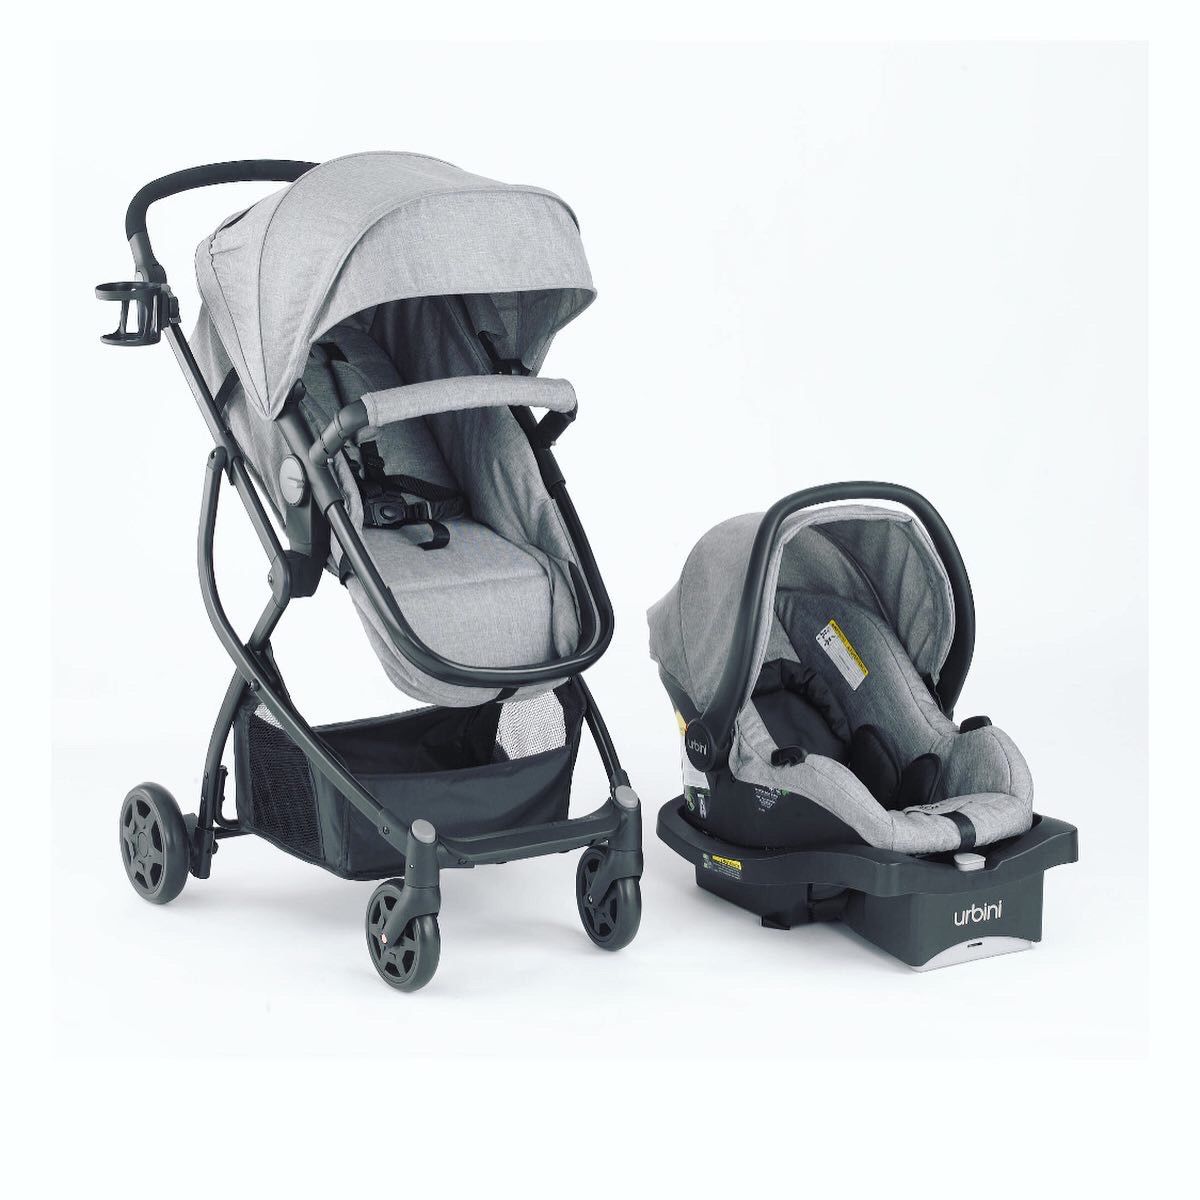 Stroller & Car Seat Combo - Special Edition Urbini Omni Plus 3in1 Travel System, Color Heather Gray